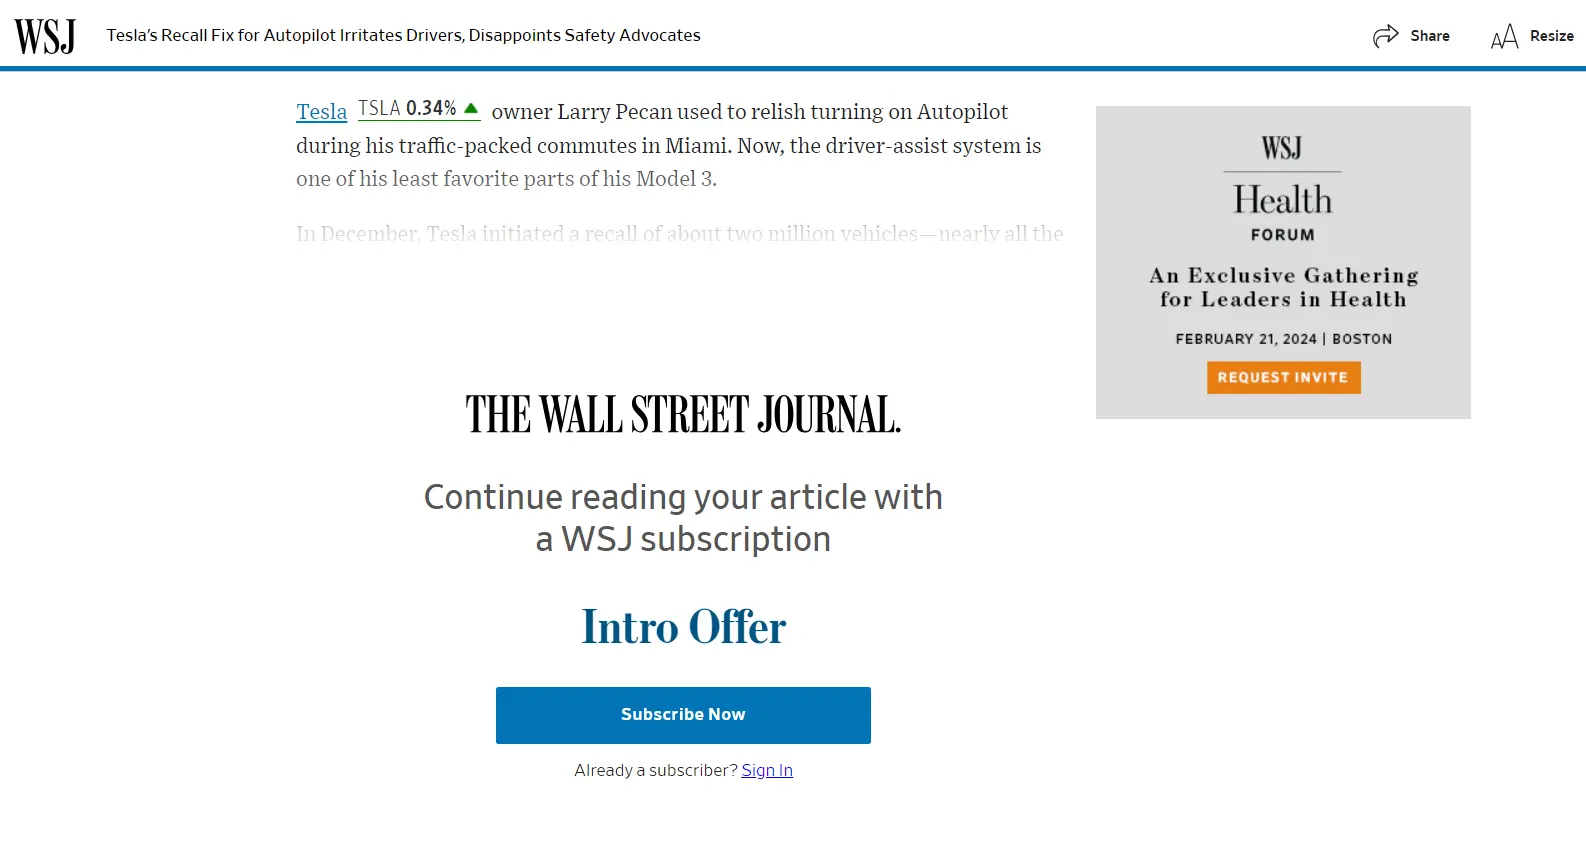 The Wall Street Journal and the Financial Times